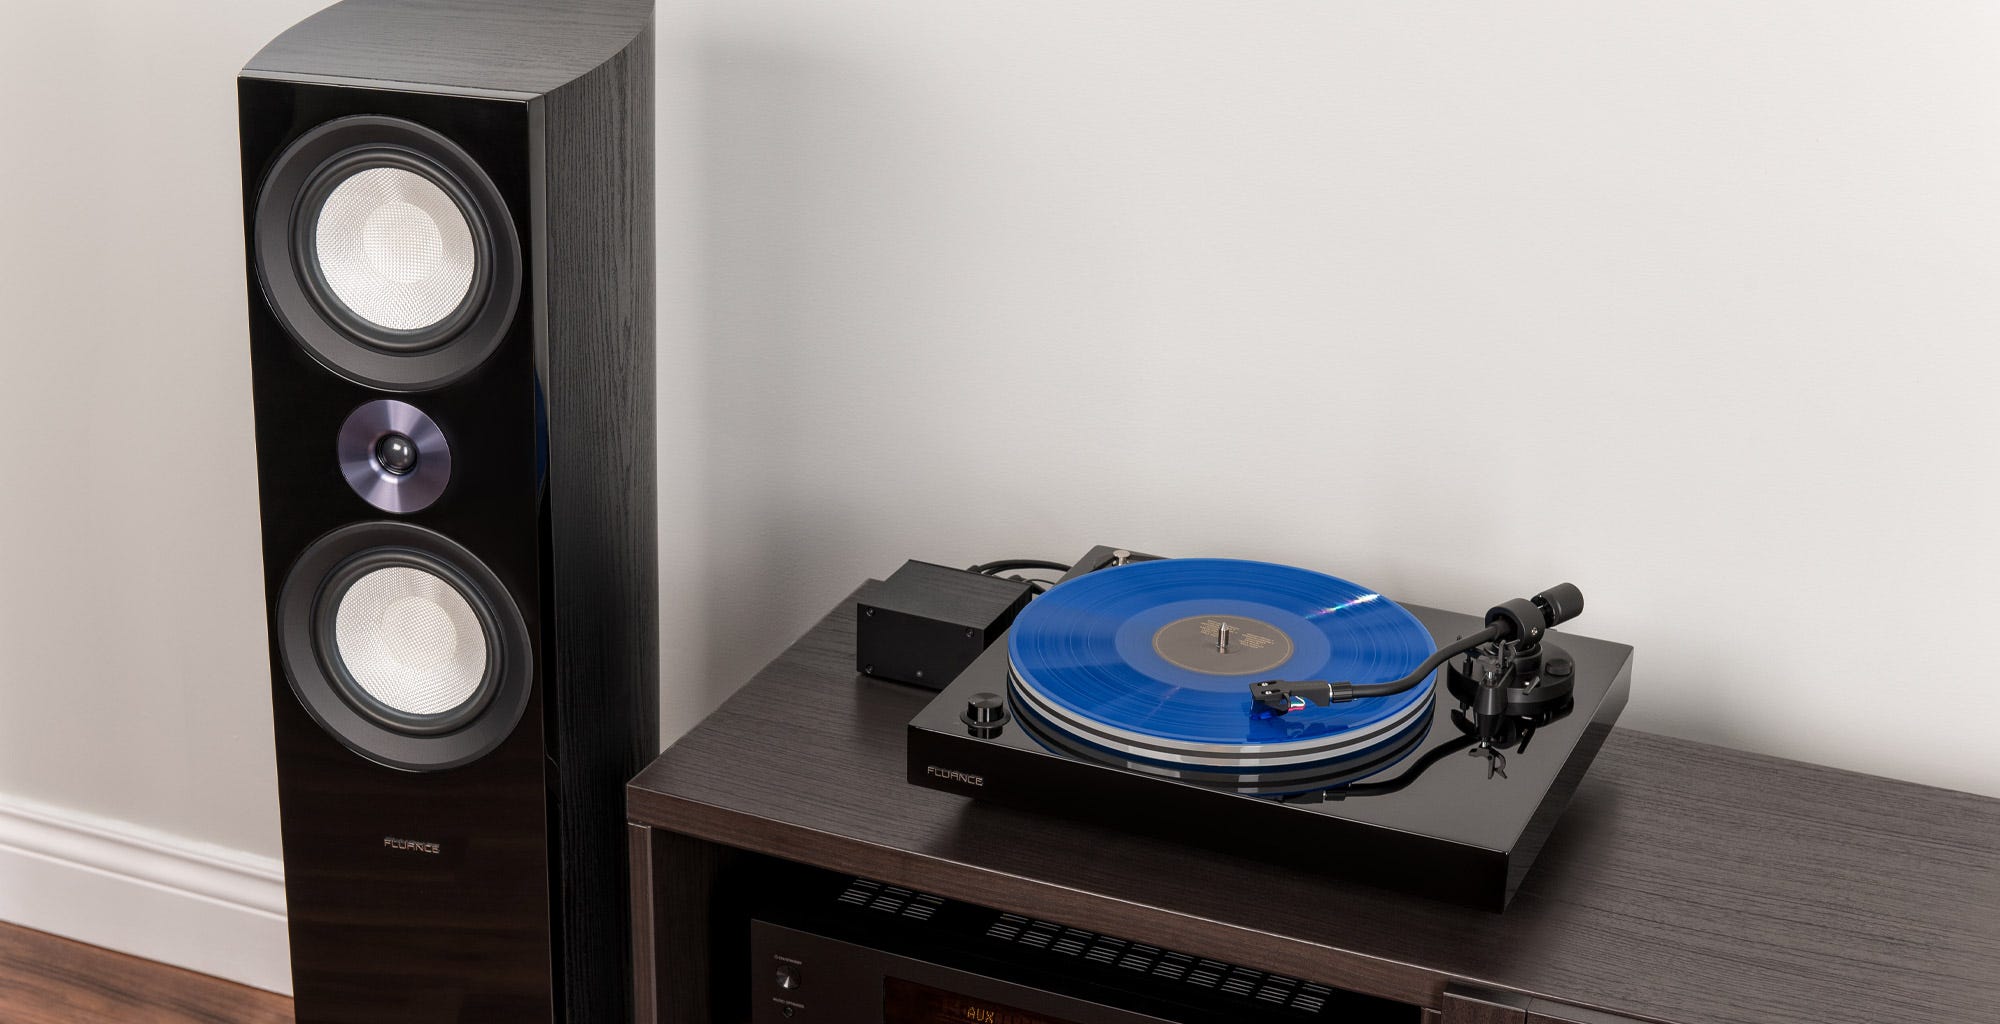 The Fluance RT85 Reference Turntable